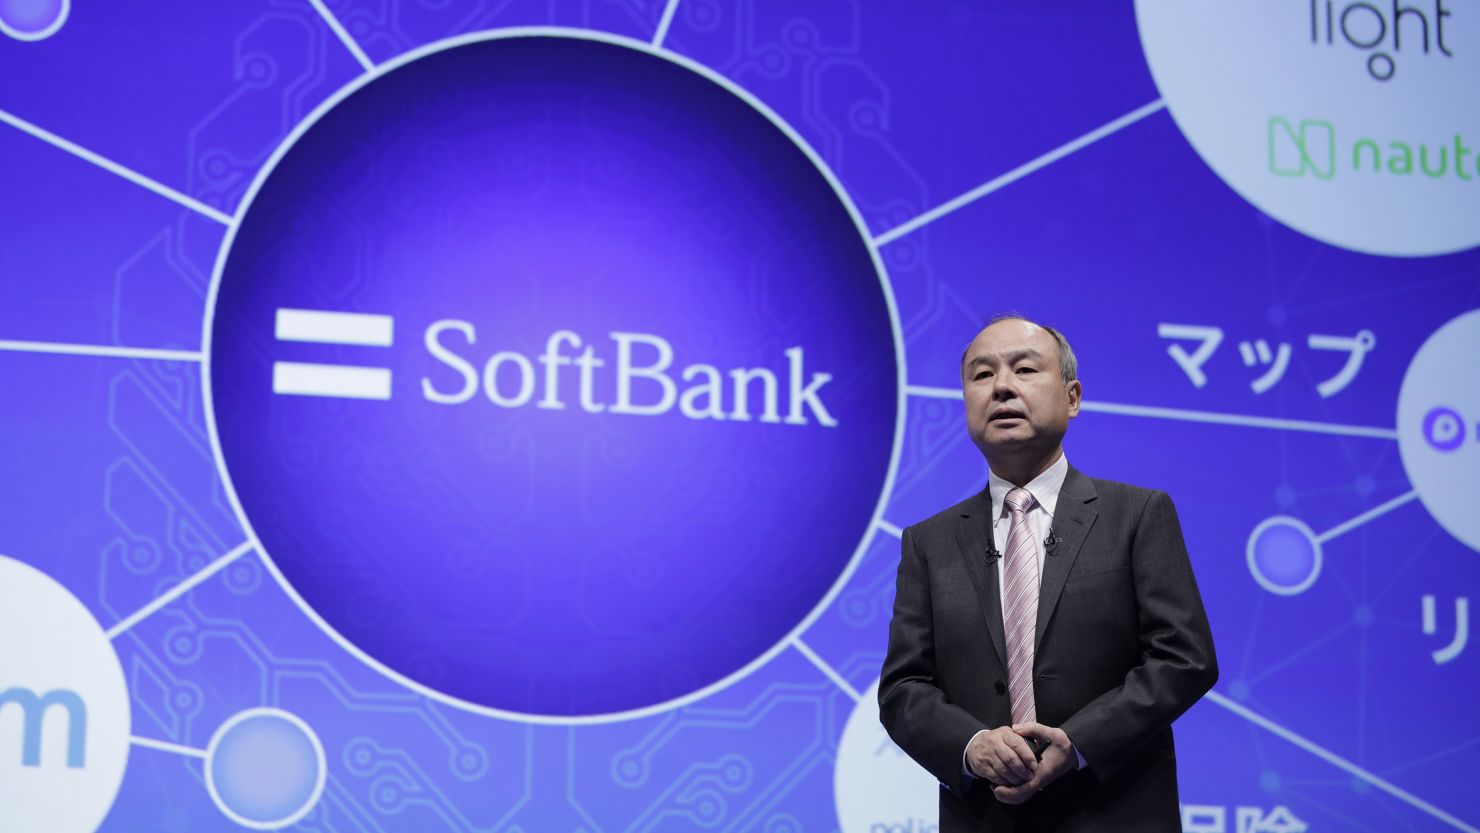 Listing the mobile business is a key part of CEO Masa Son's efforts to reposition SoftBank as a global tech investor. 